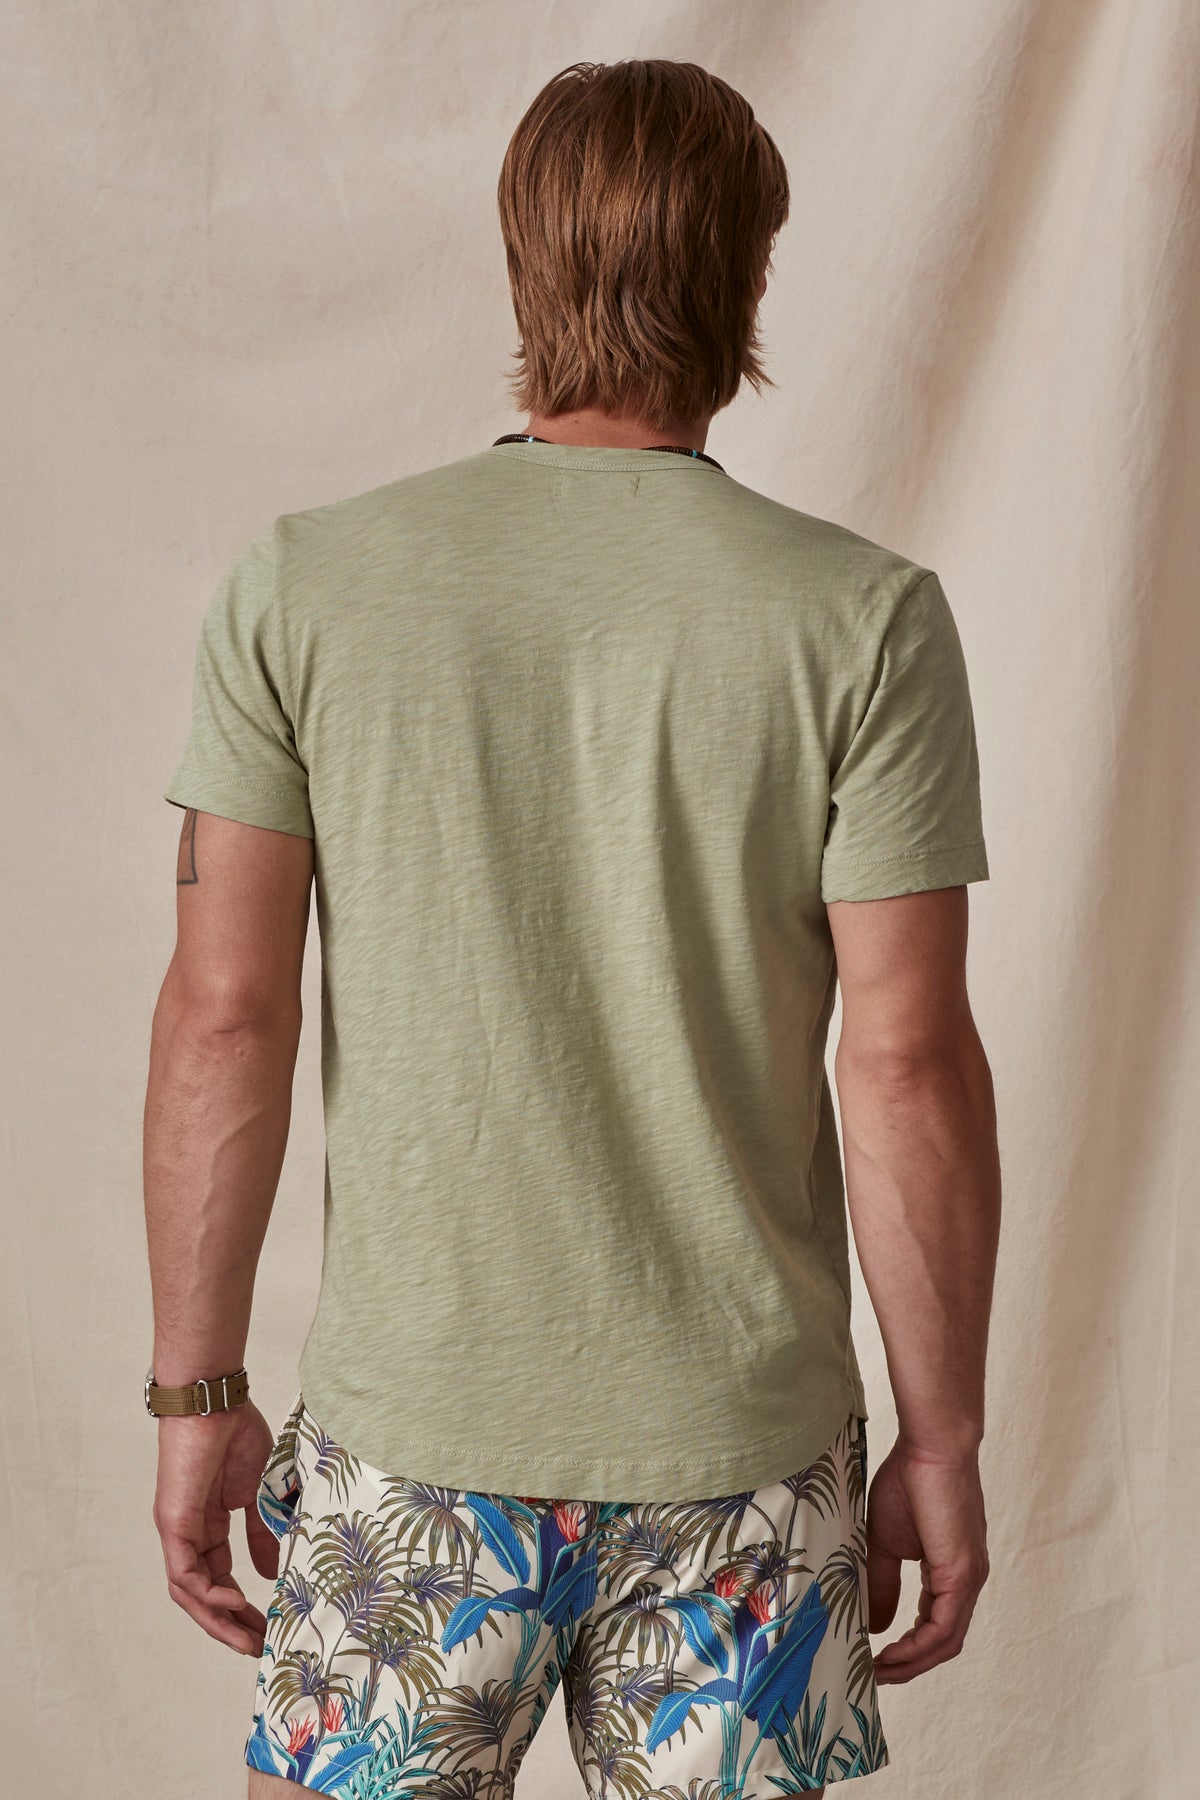 A man viewed from behind wearing a green AMARO TEE by Velvet by Graham & Spencer with a curved hemline and colorful tropical print shorts.-36752671572161